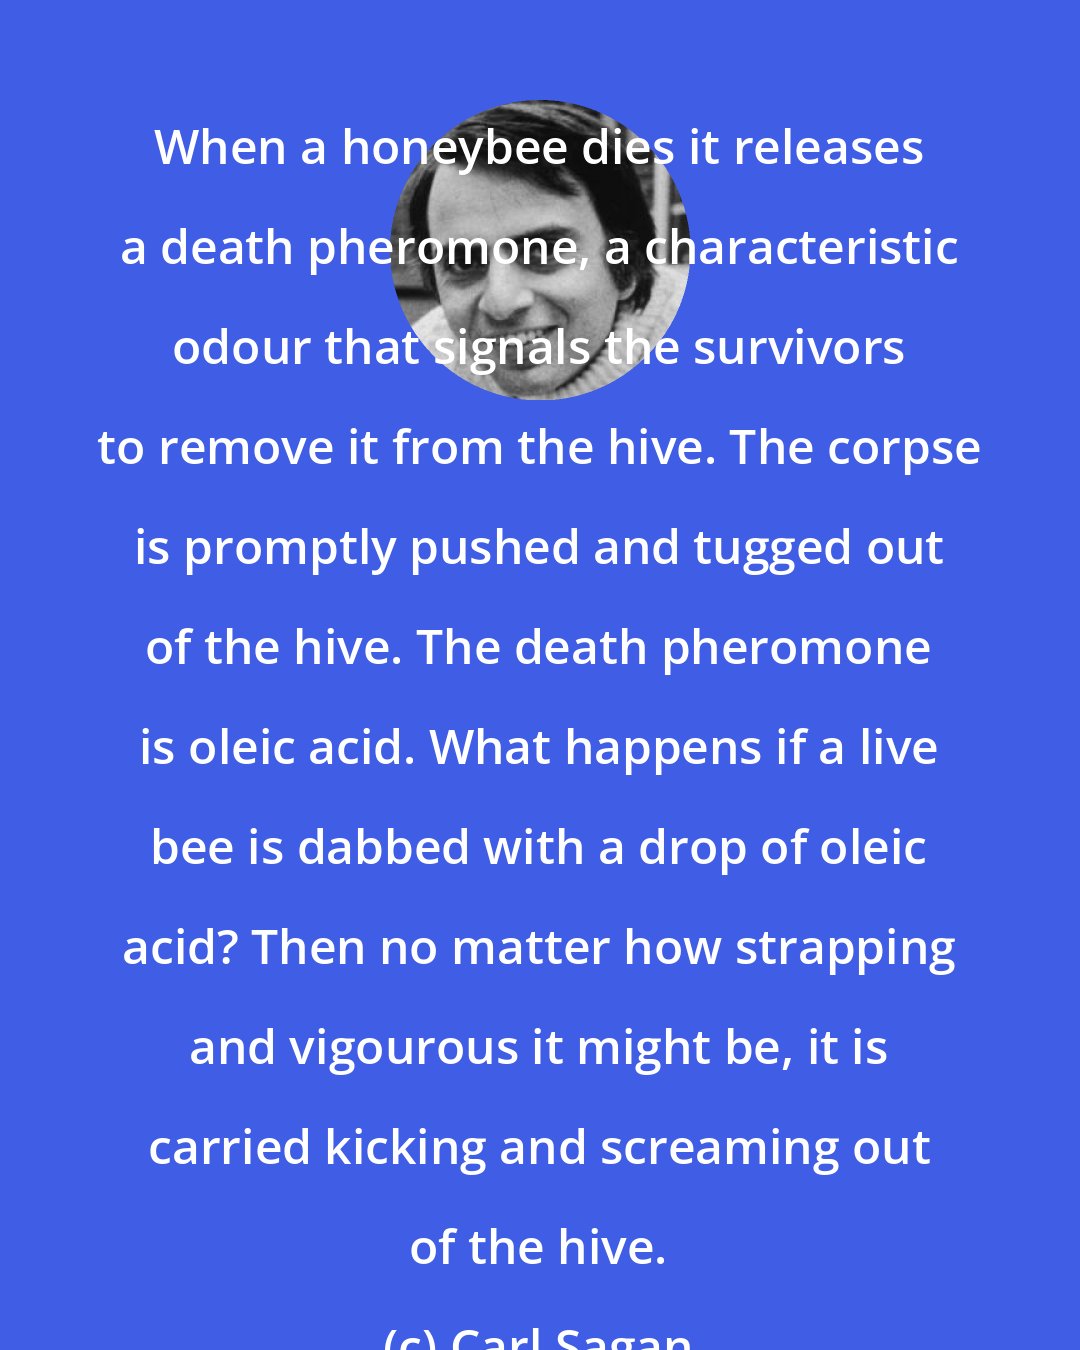 Carl Sagan: When a honeybee dies it releases a death pheromone, a characteristic odour that signals the survivors to remove it from the hive. The corpse is promptly pushed and tugged out of the hive. The death pheromone is oleic acid. What happens if a live bee is dabbed with a drop of oleic acid? Then no matter how strapping and vigourous it might be, it is carried kicking and screaming out of the hive.